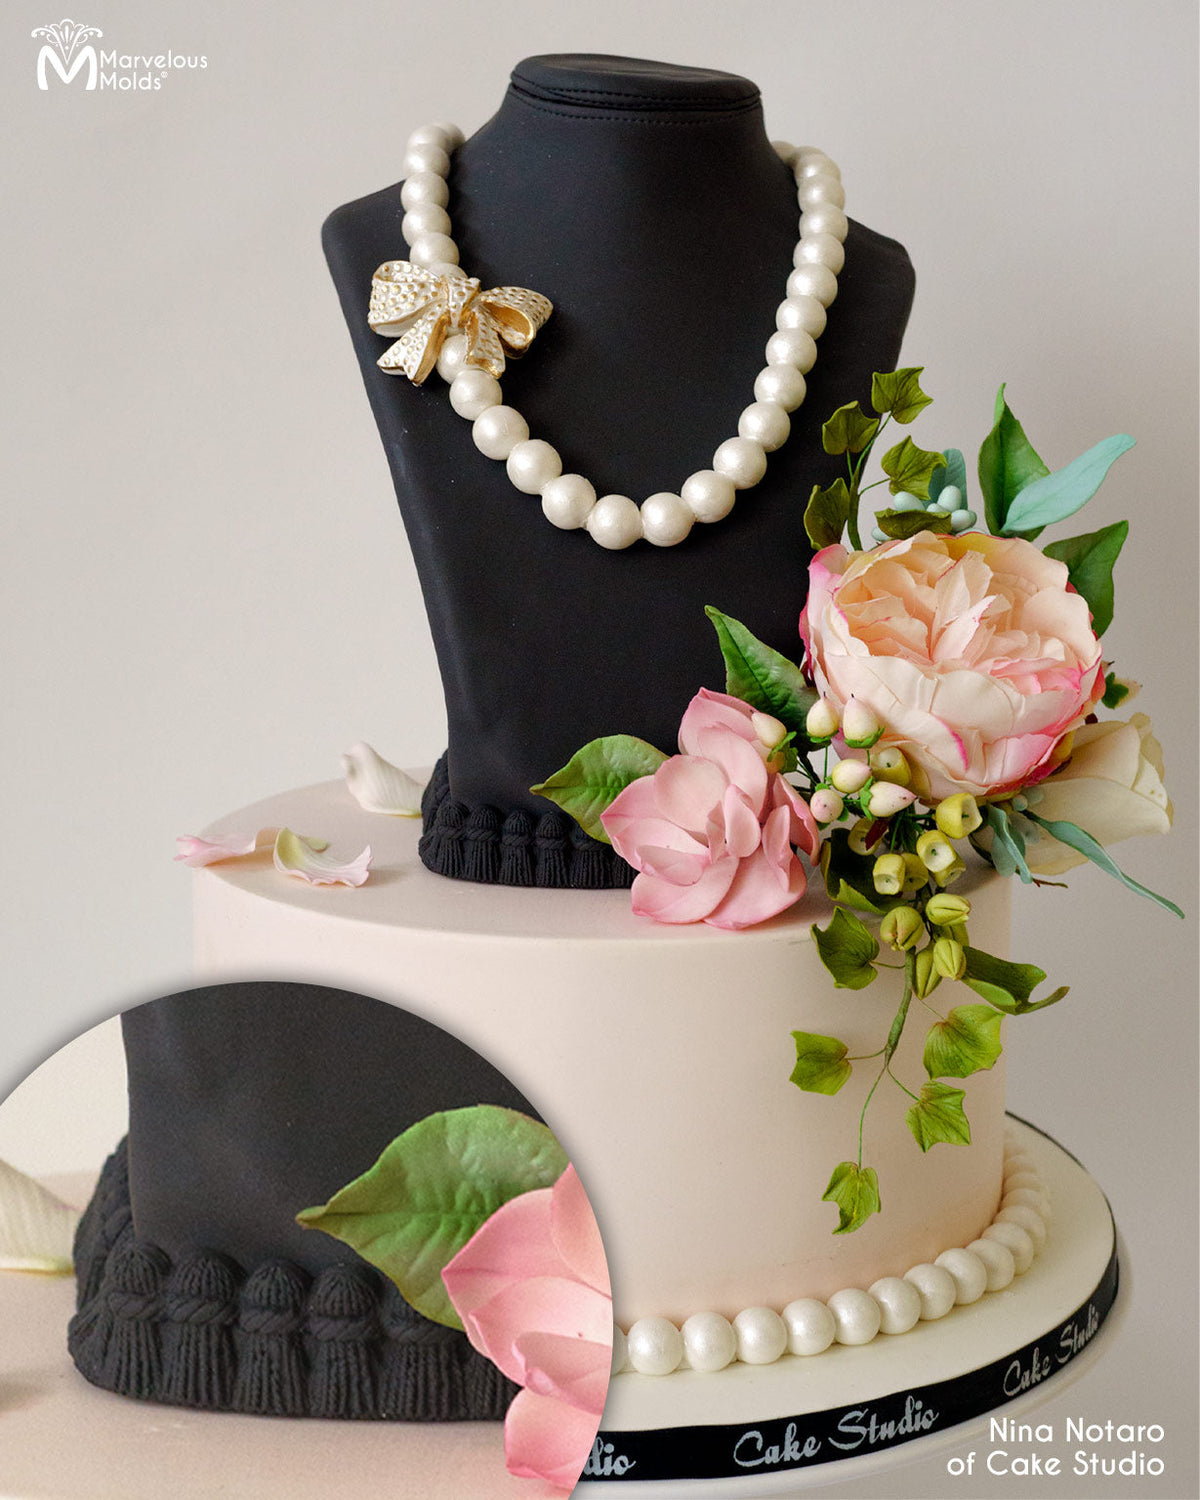 Cake Bust with Edible Pearl Necklace, Bordered with the Marvelous Molds Grand Tassel Border Food Safe Silicone Mold